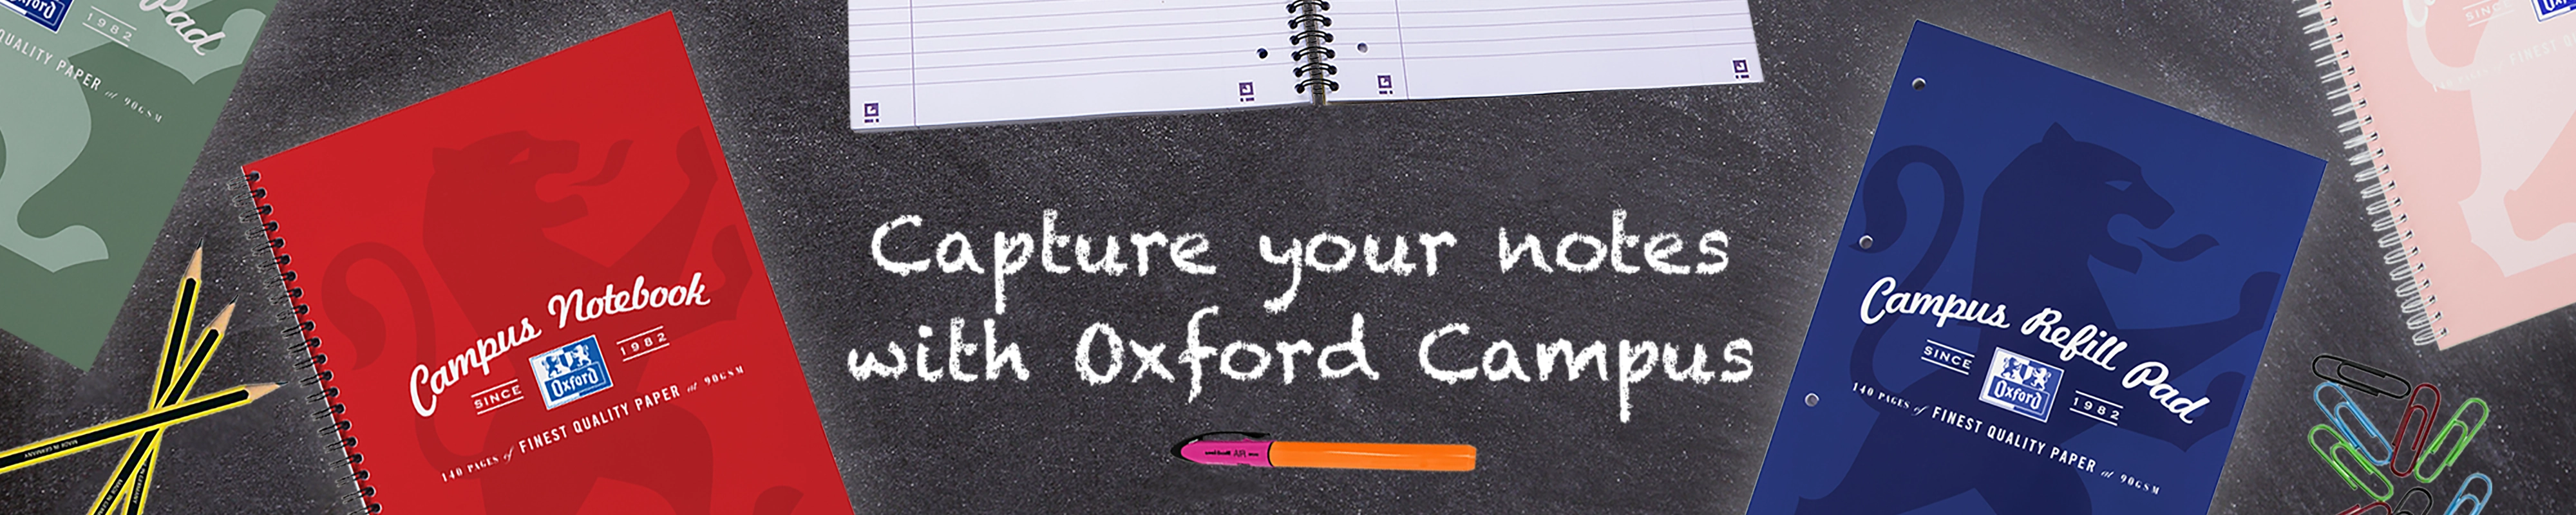 Oxford Campus - Power in your hands 